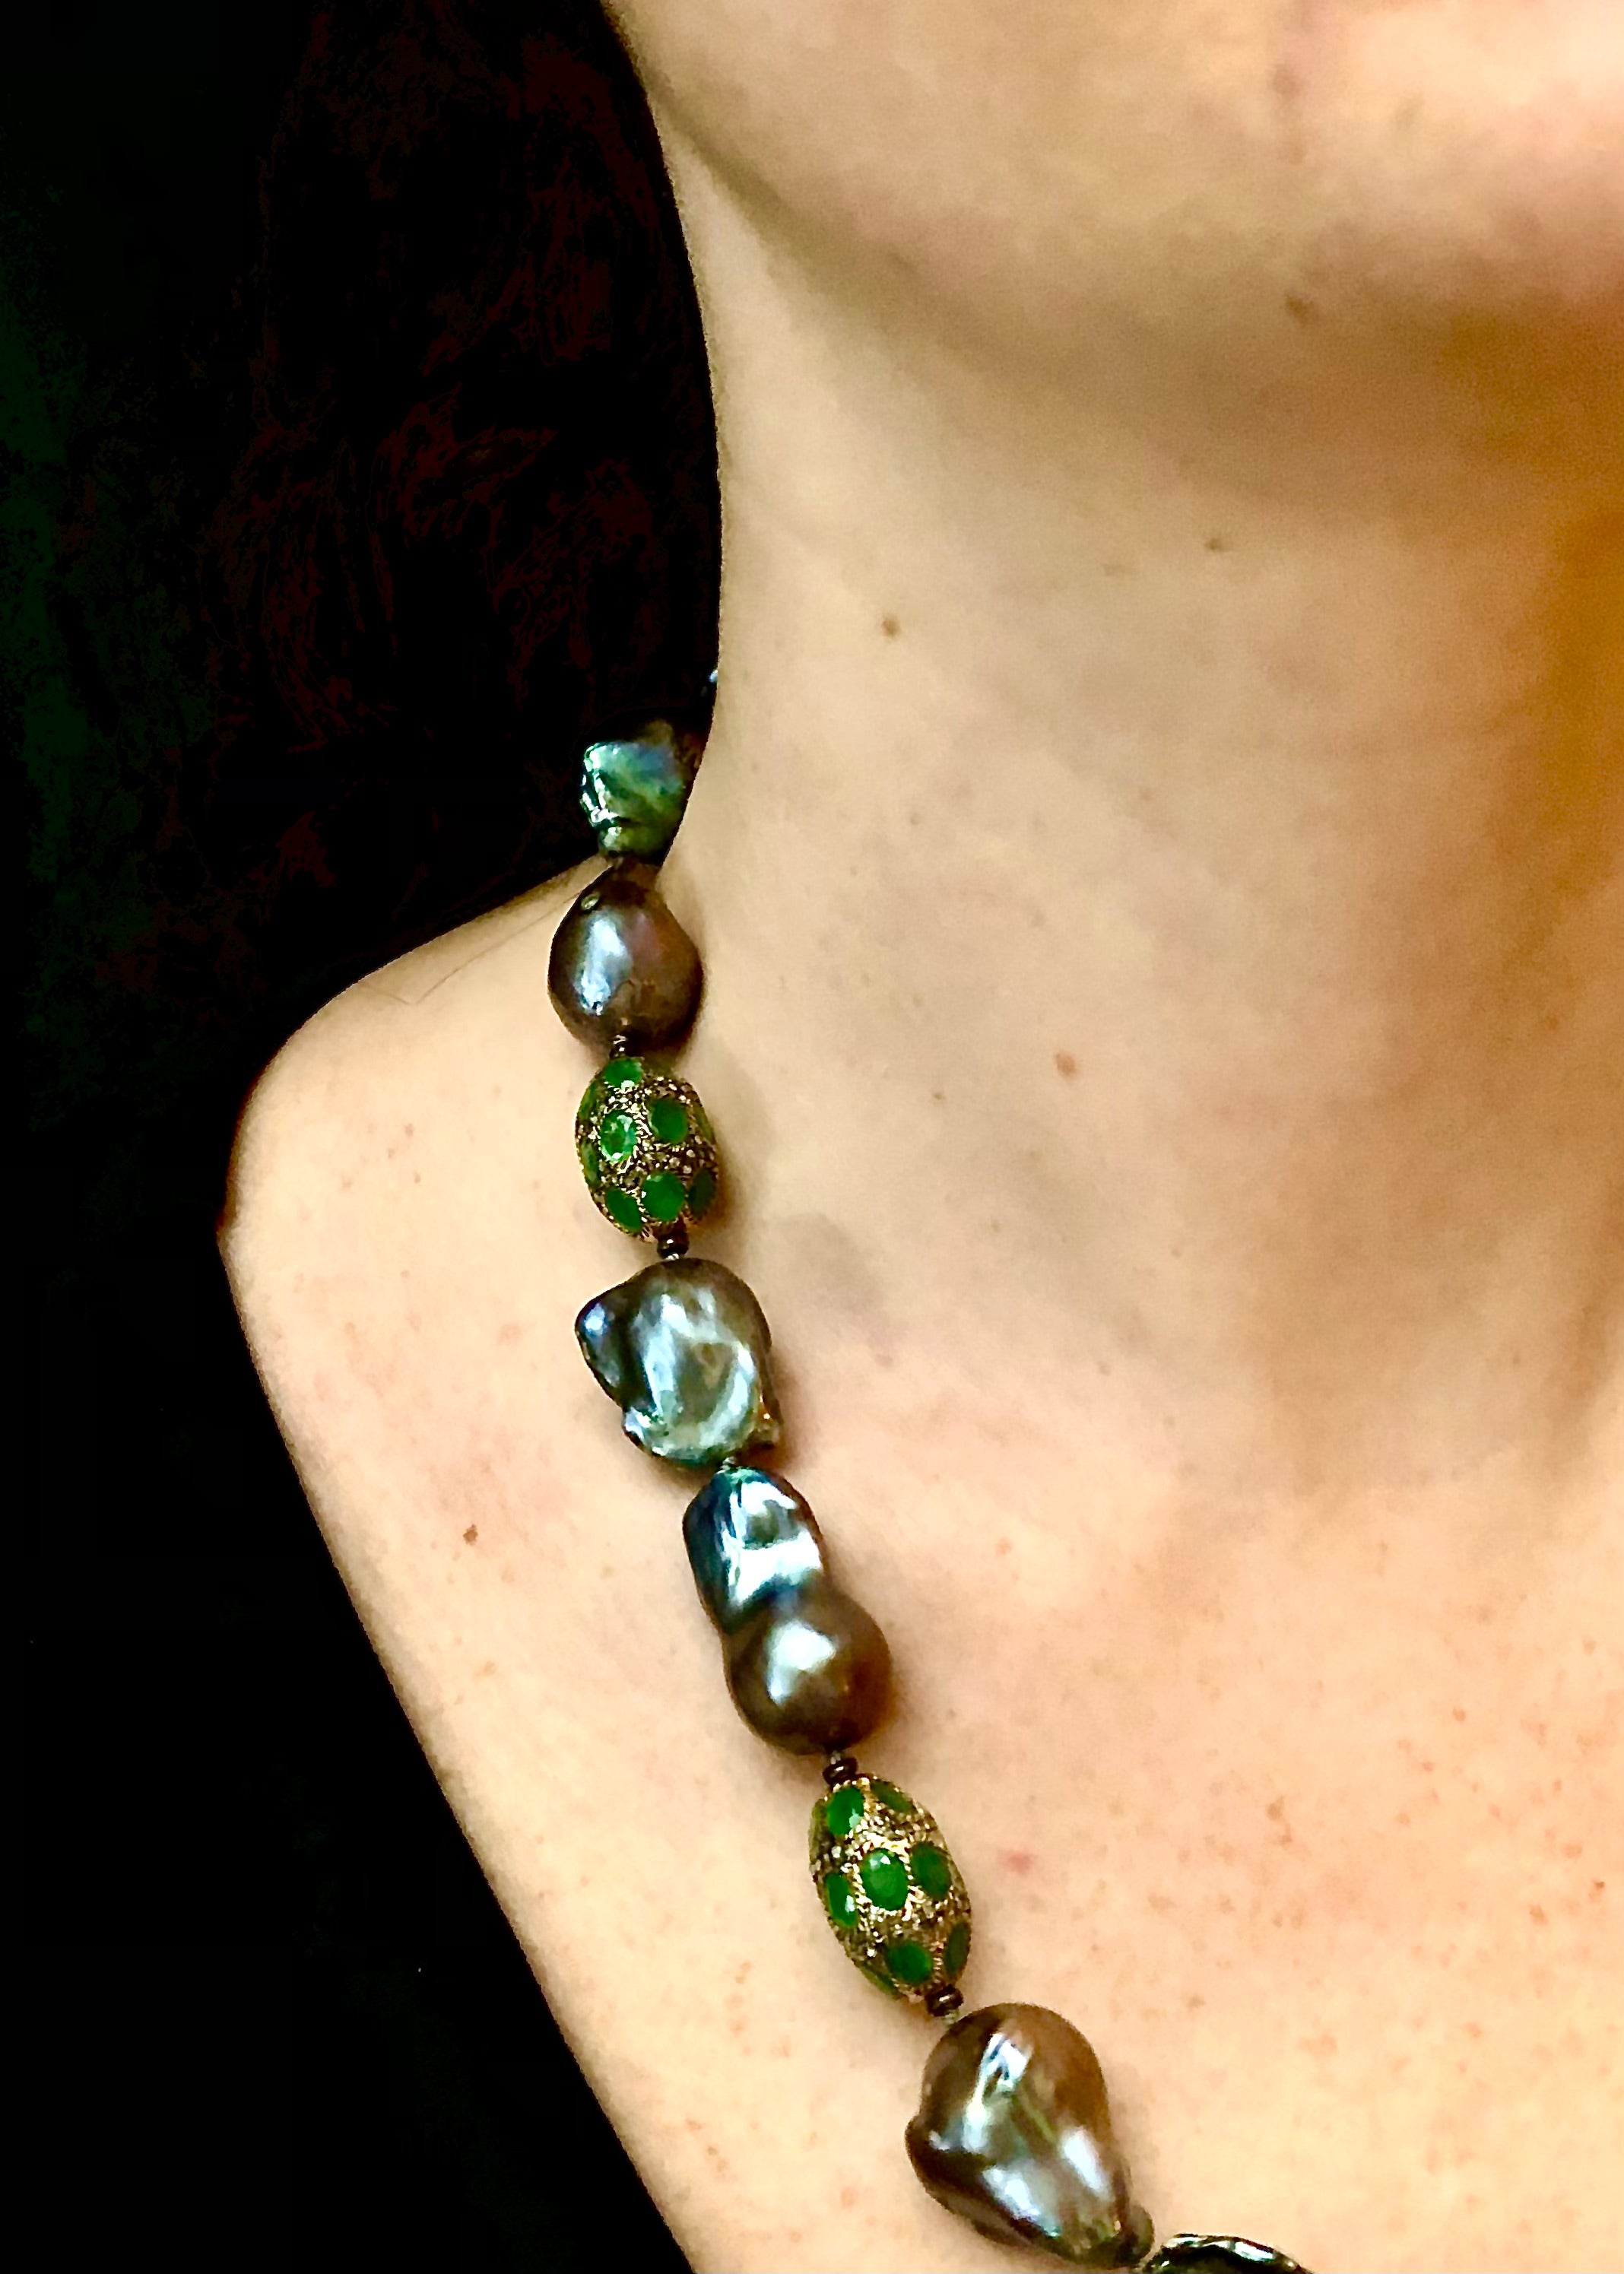 Glamorous freshwater peacock pearls w/ sliced diamonds and emeralds necklace